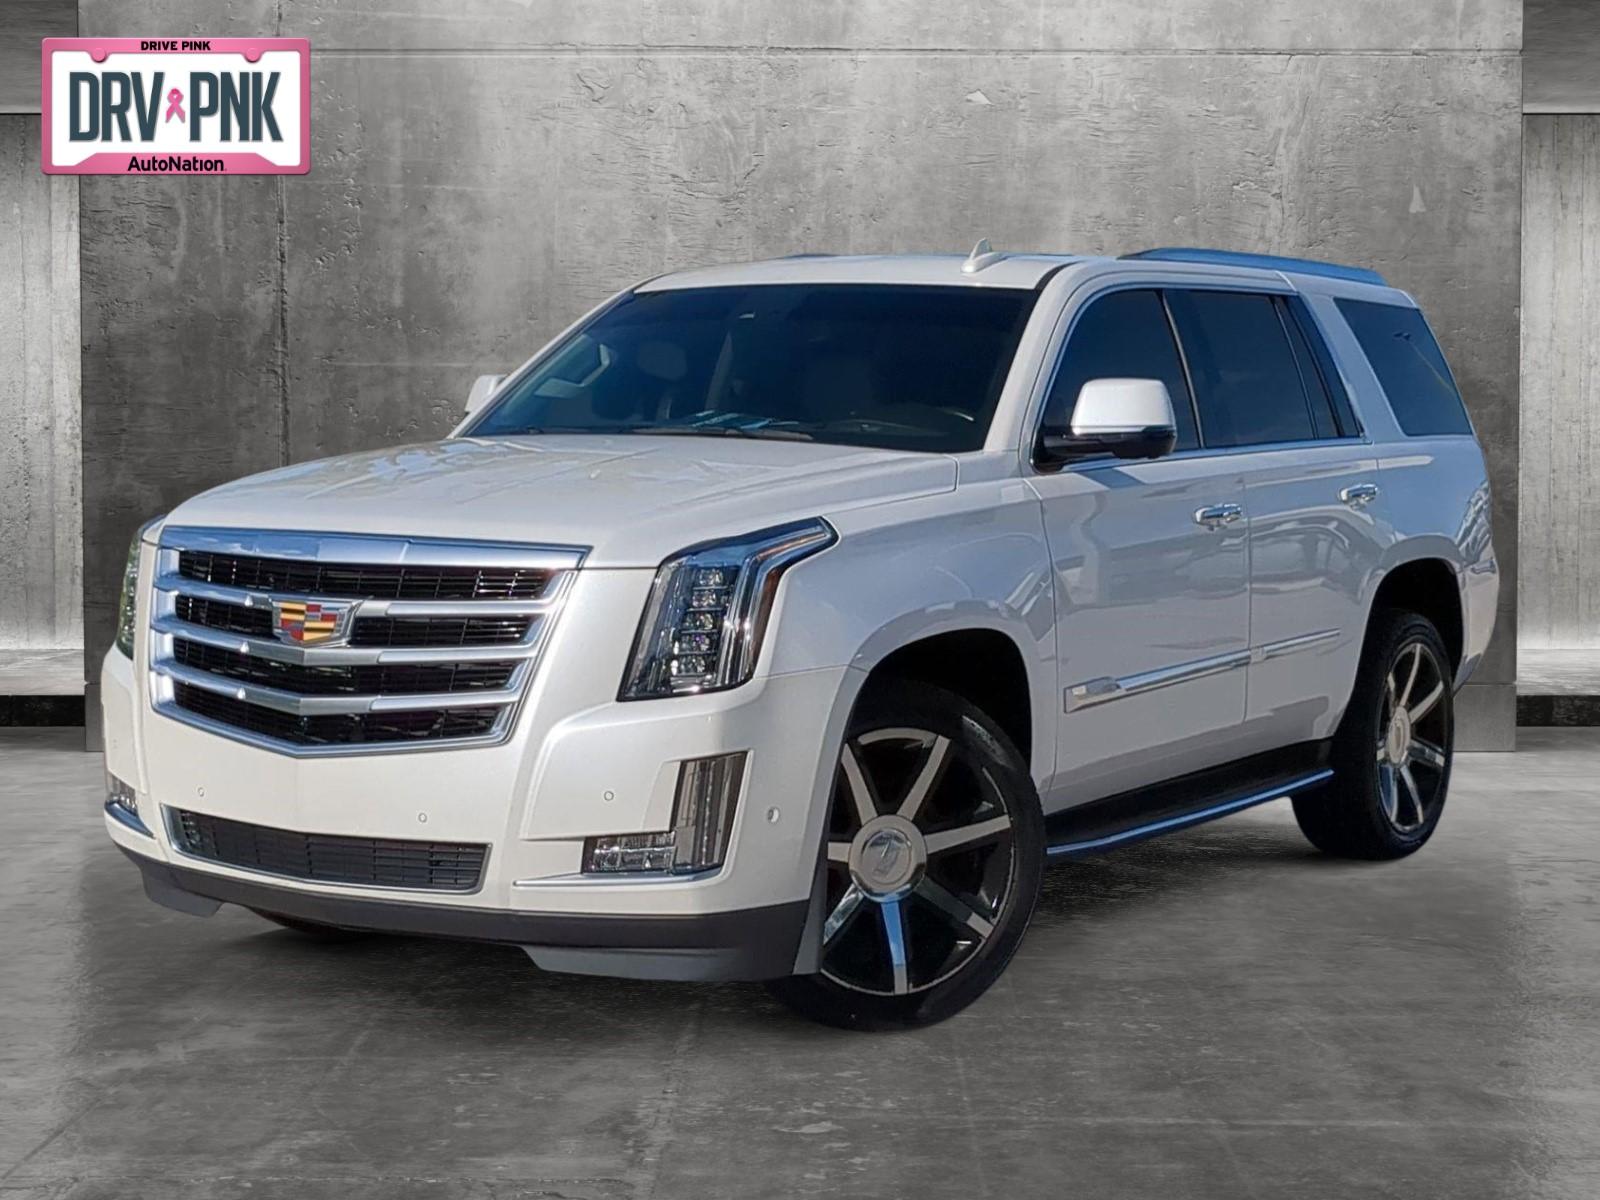 2017 Cadillac Escalade Vehicle Photo in Ft. Myers, FL 33907